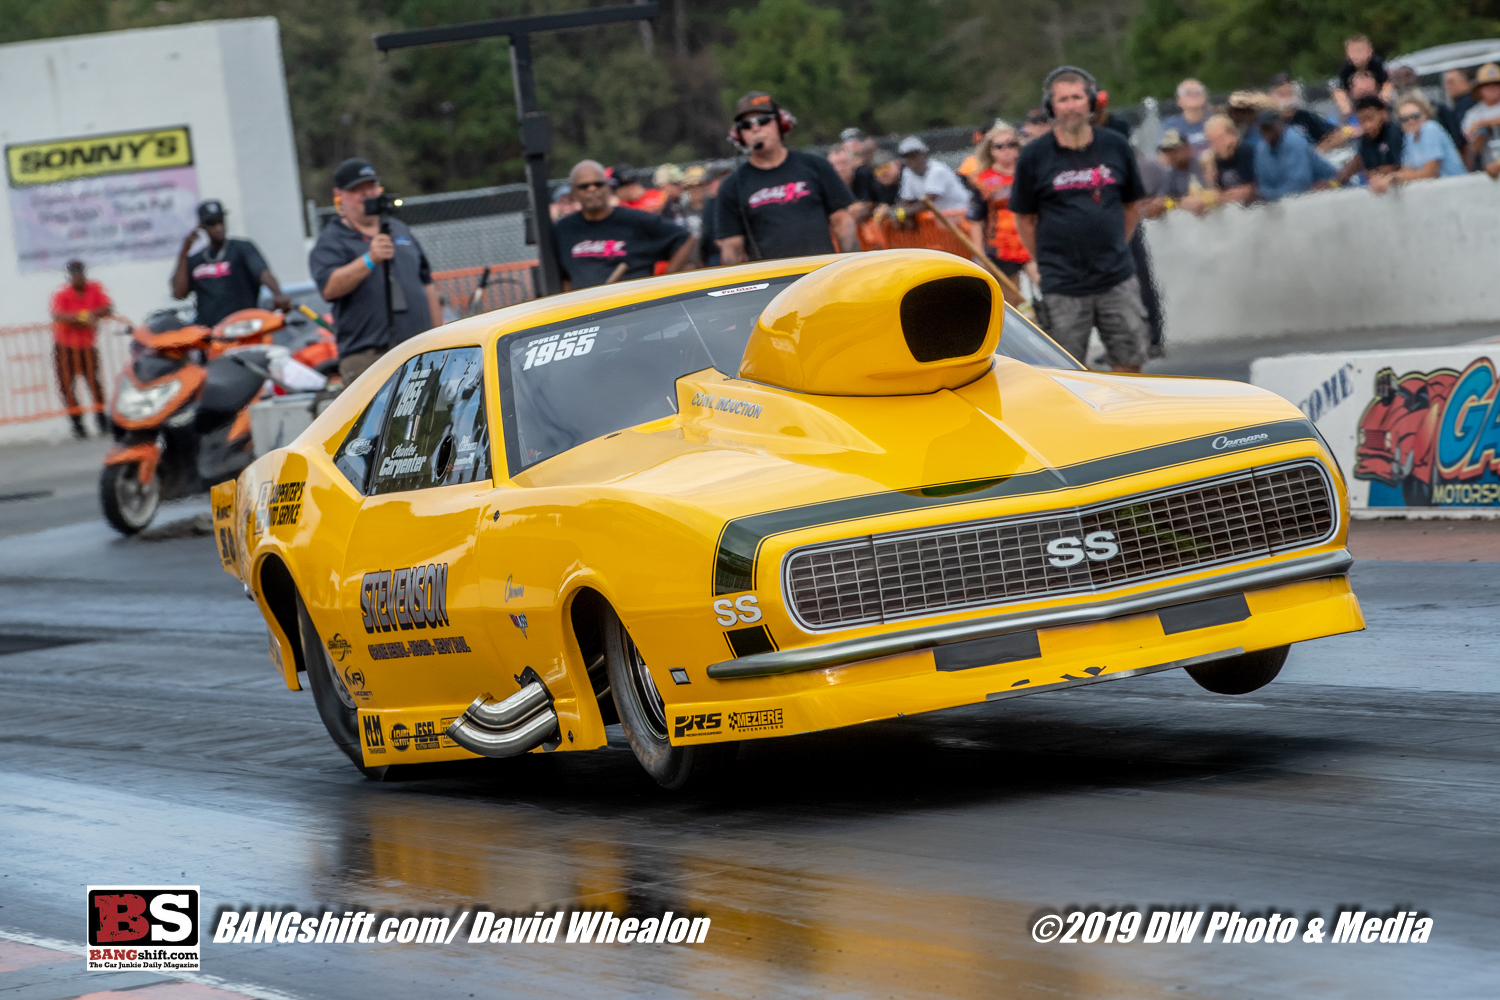 2019 Fall Mad Mule Photo Coverage: Check Out These Action Images From The Strip At GALOT Motorsports Park